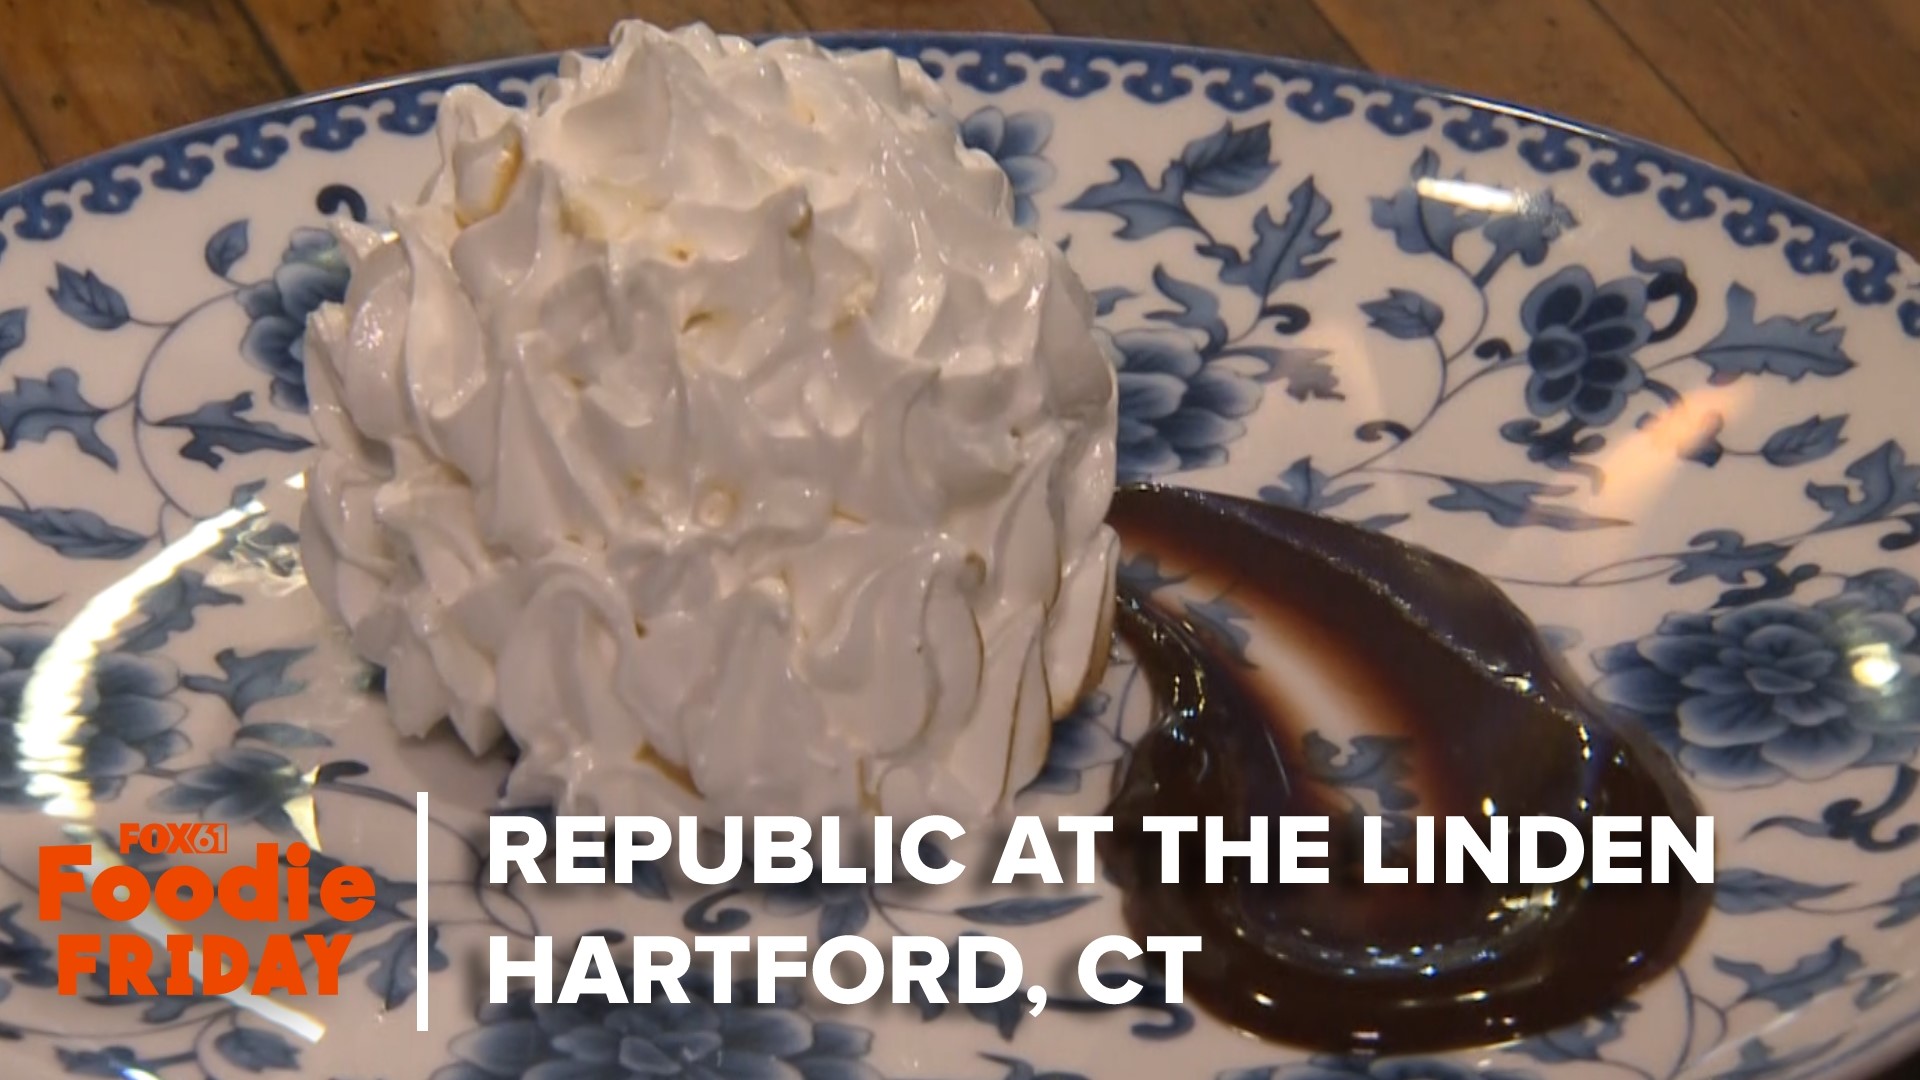 Matt Scott visited the Republic at the Linden in Hartford for Foodie Friday. The gastropub has another location in Bloomfield.